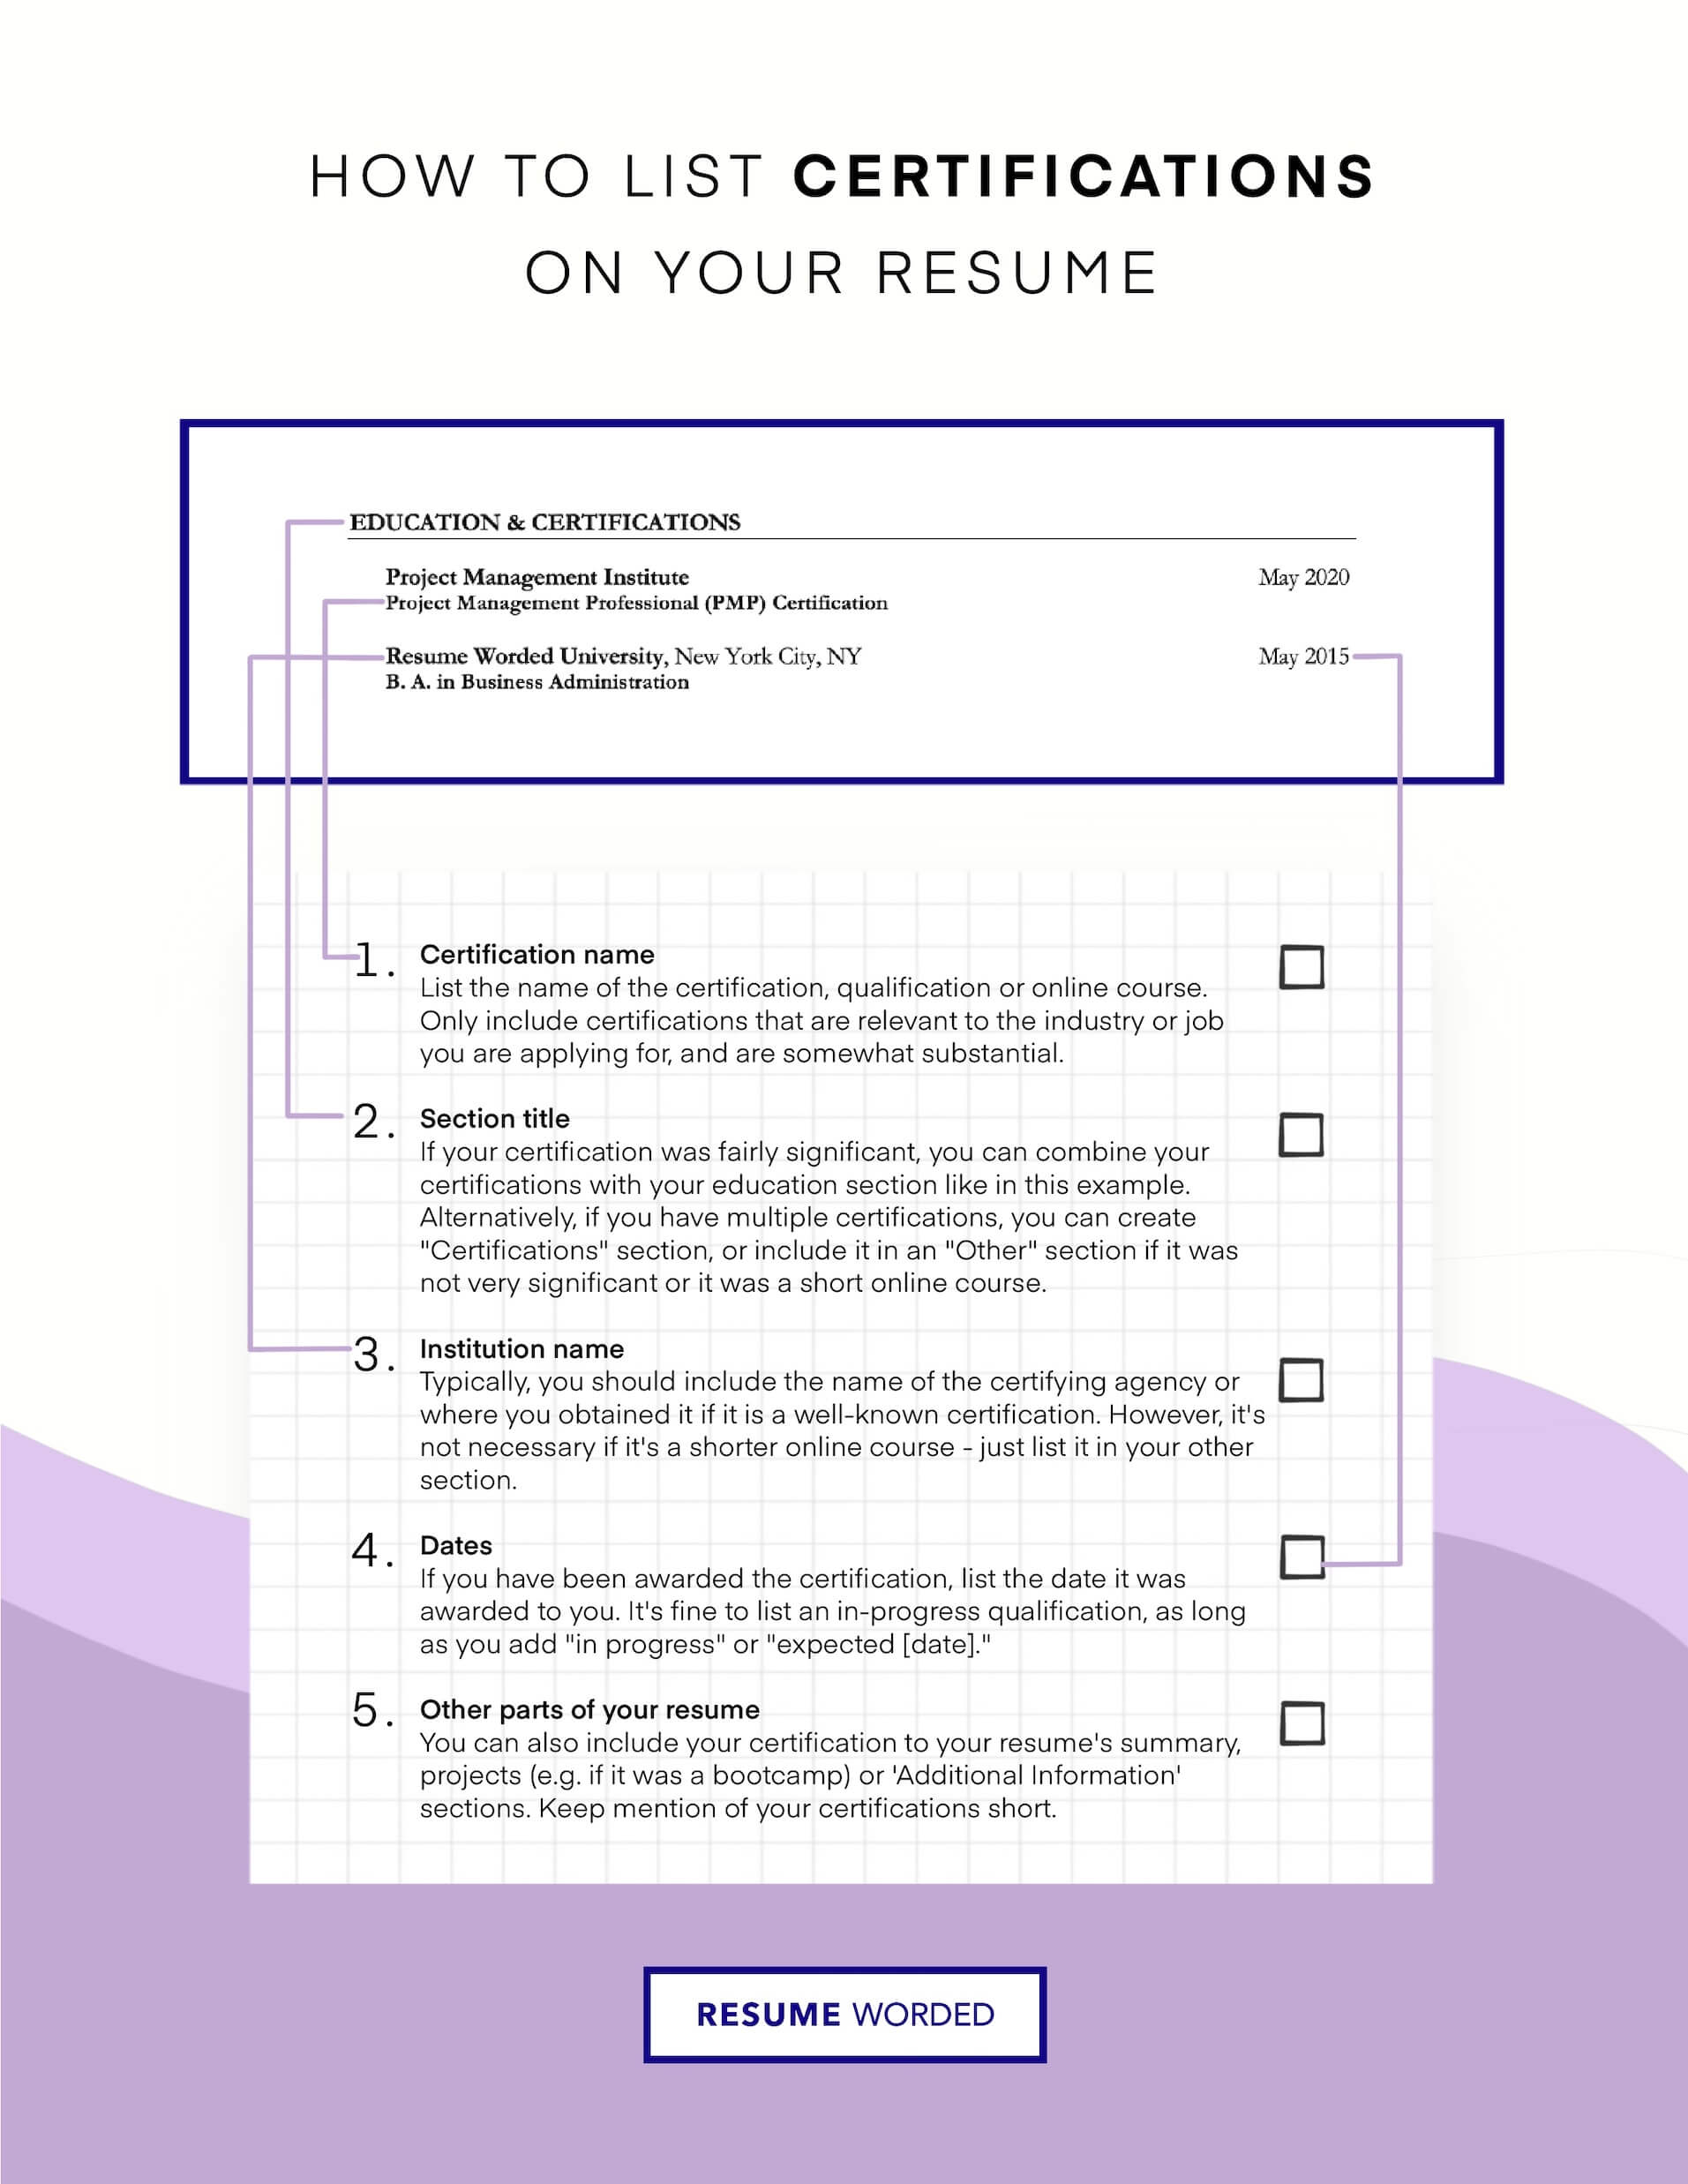 Gain certifications that relate to the role of electrical engineer - Electrical Engineer Resume